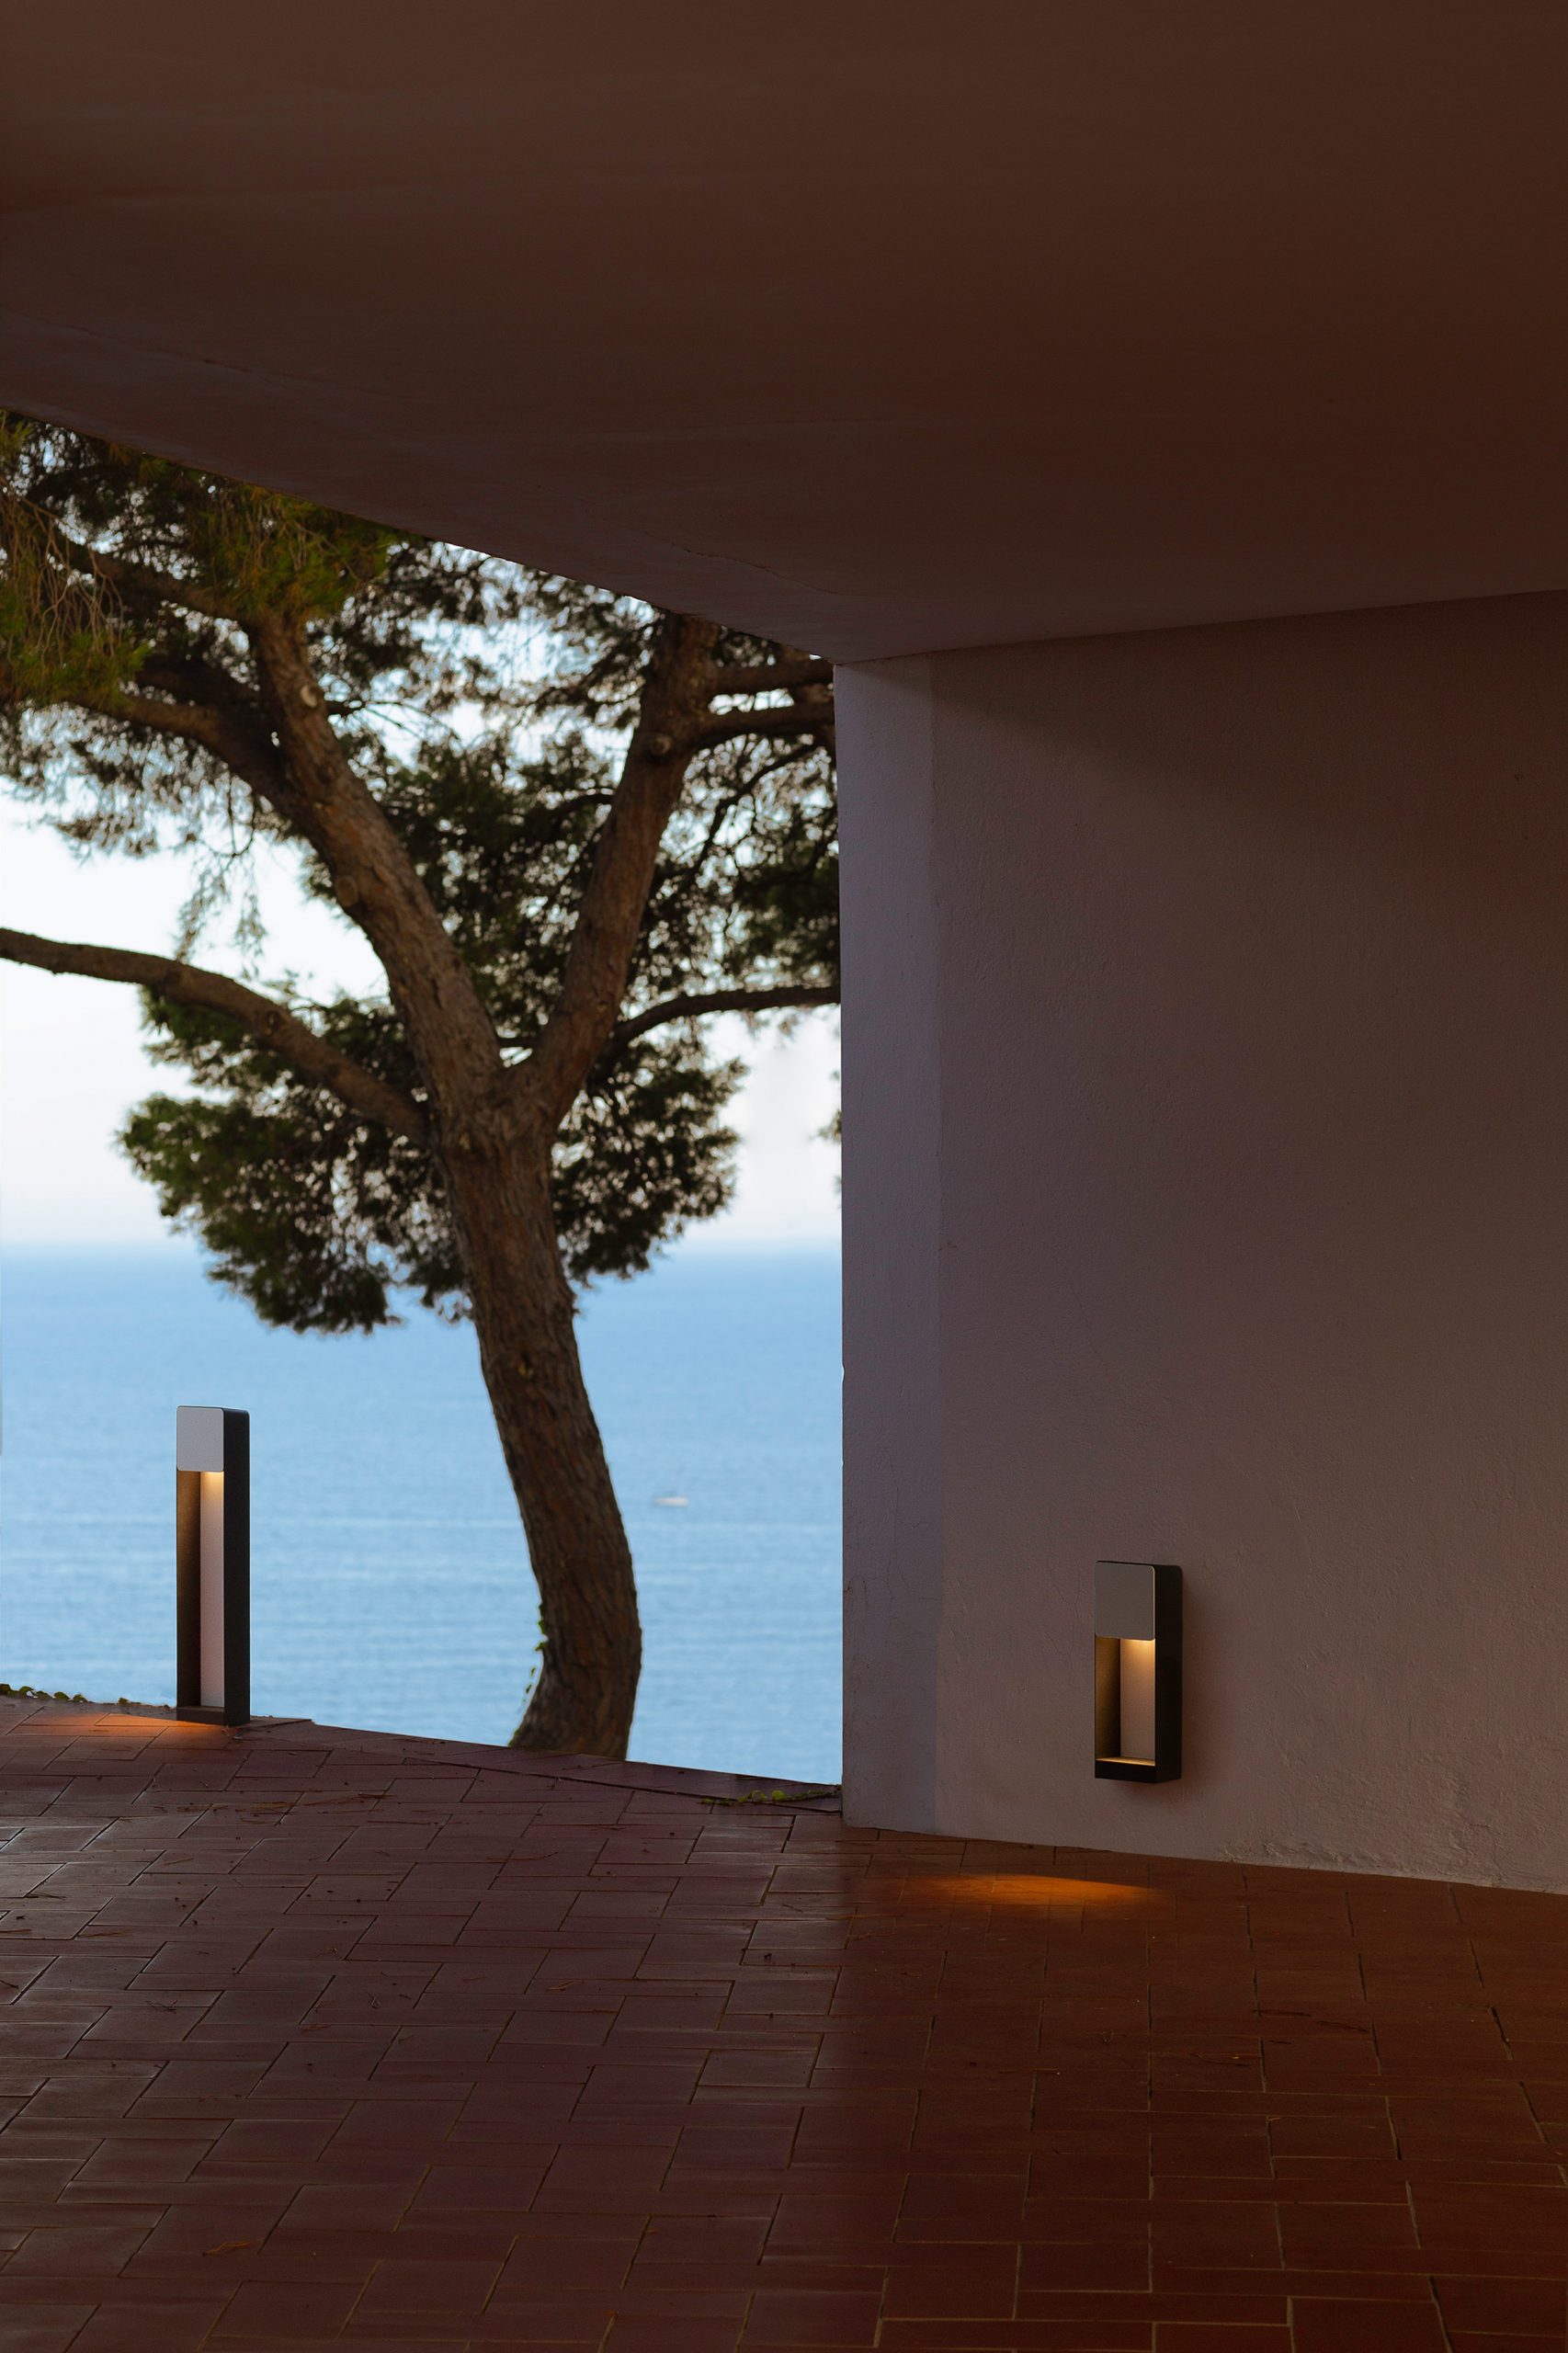 Lab outdoor lamp by Francesc Rife for Marset on a terrace